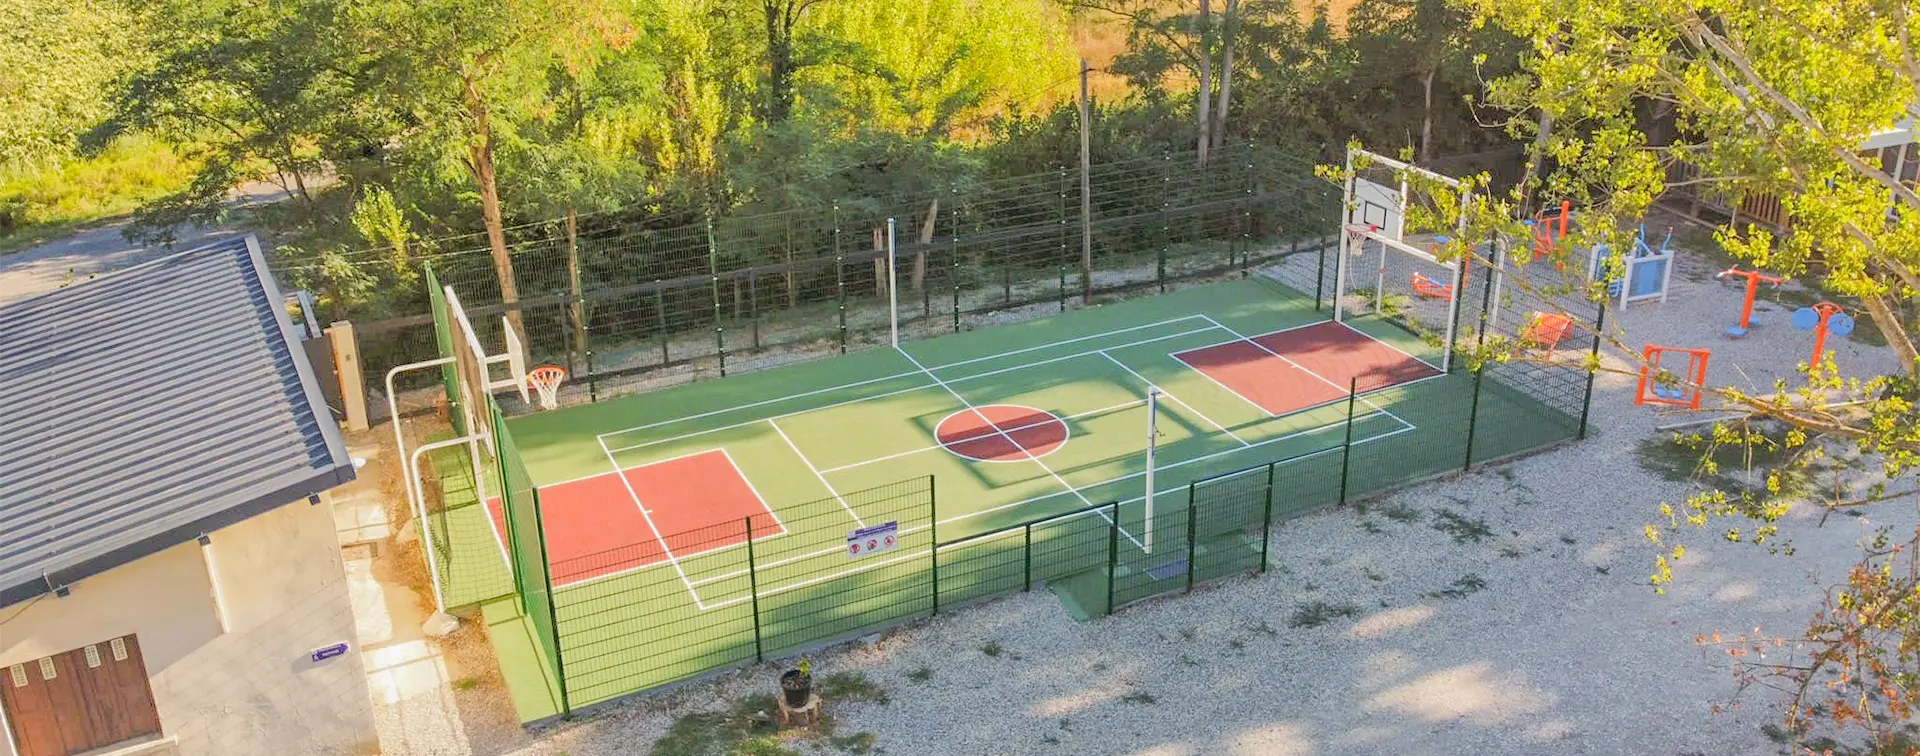 multi-sport field for the whole family